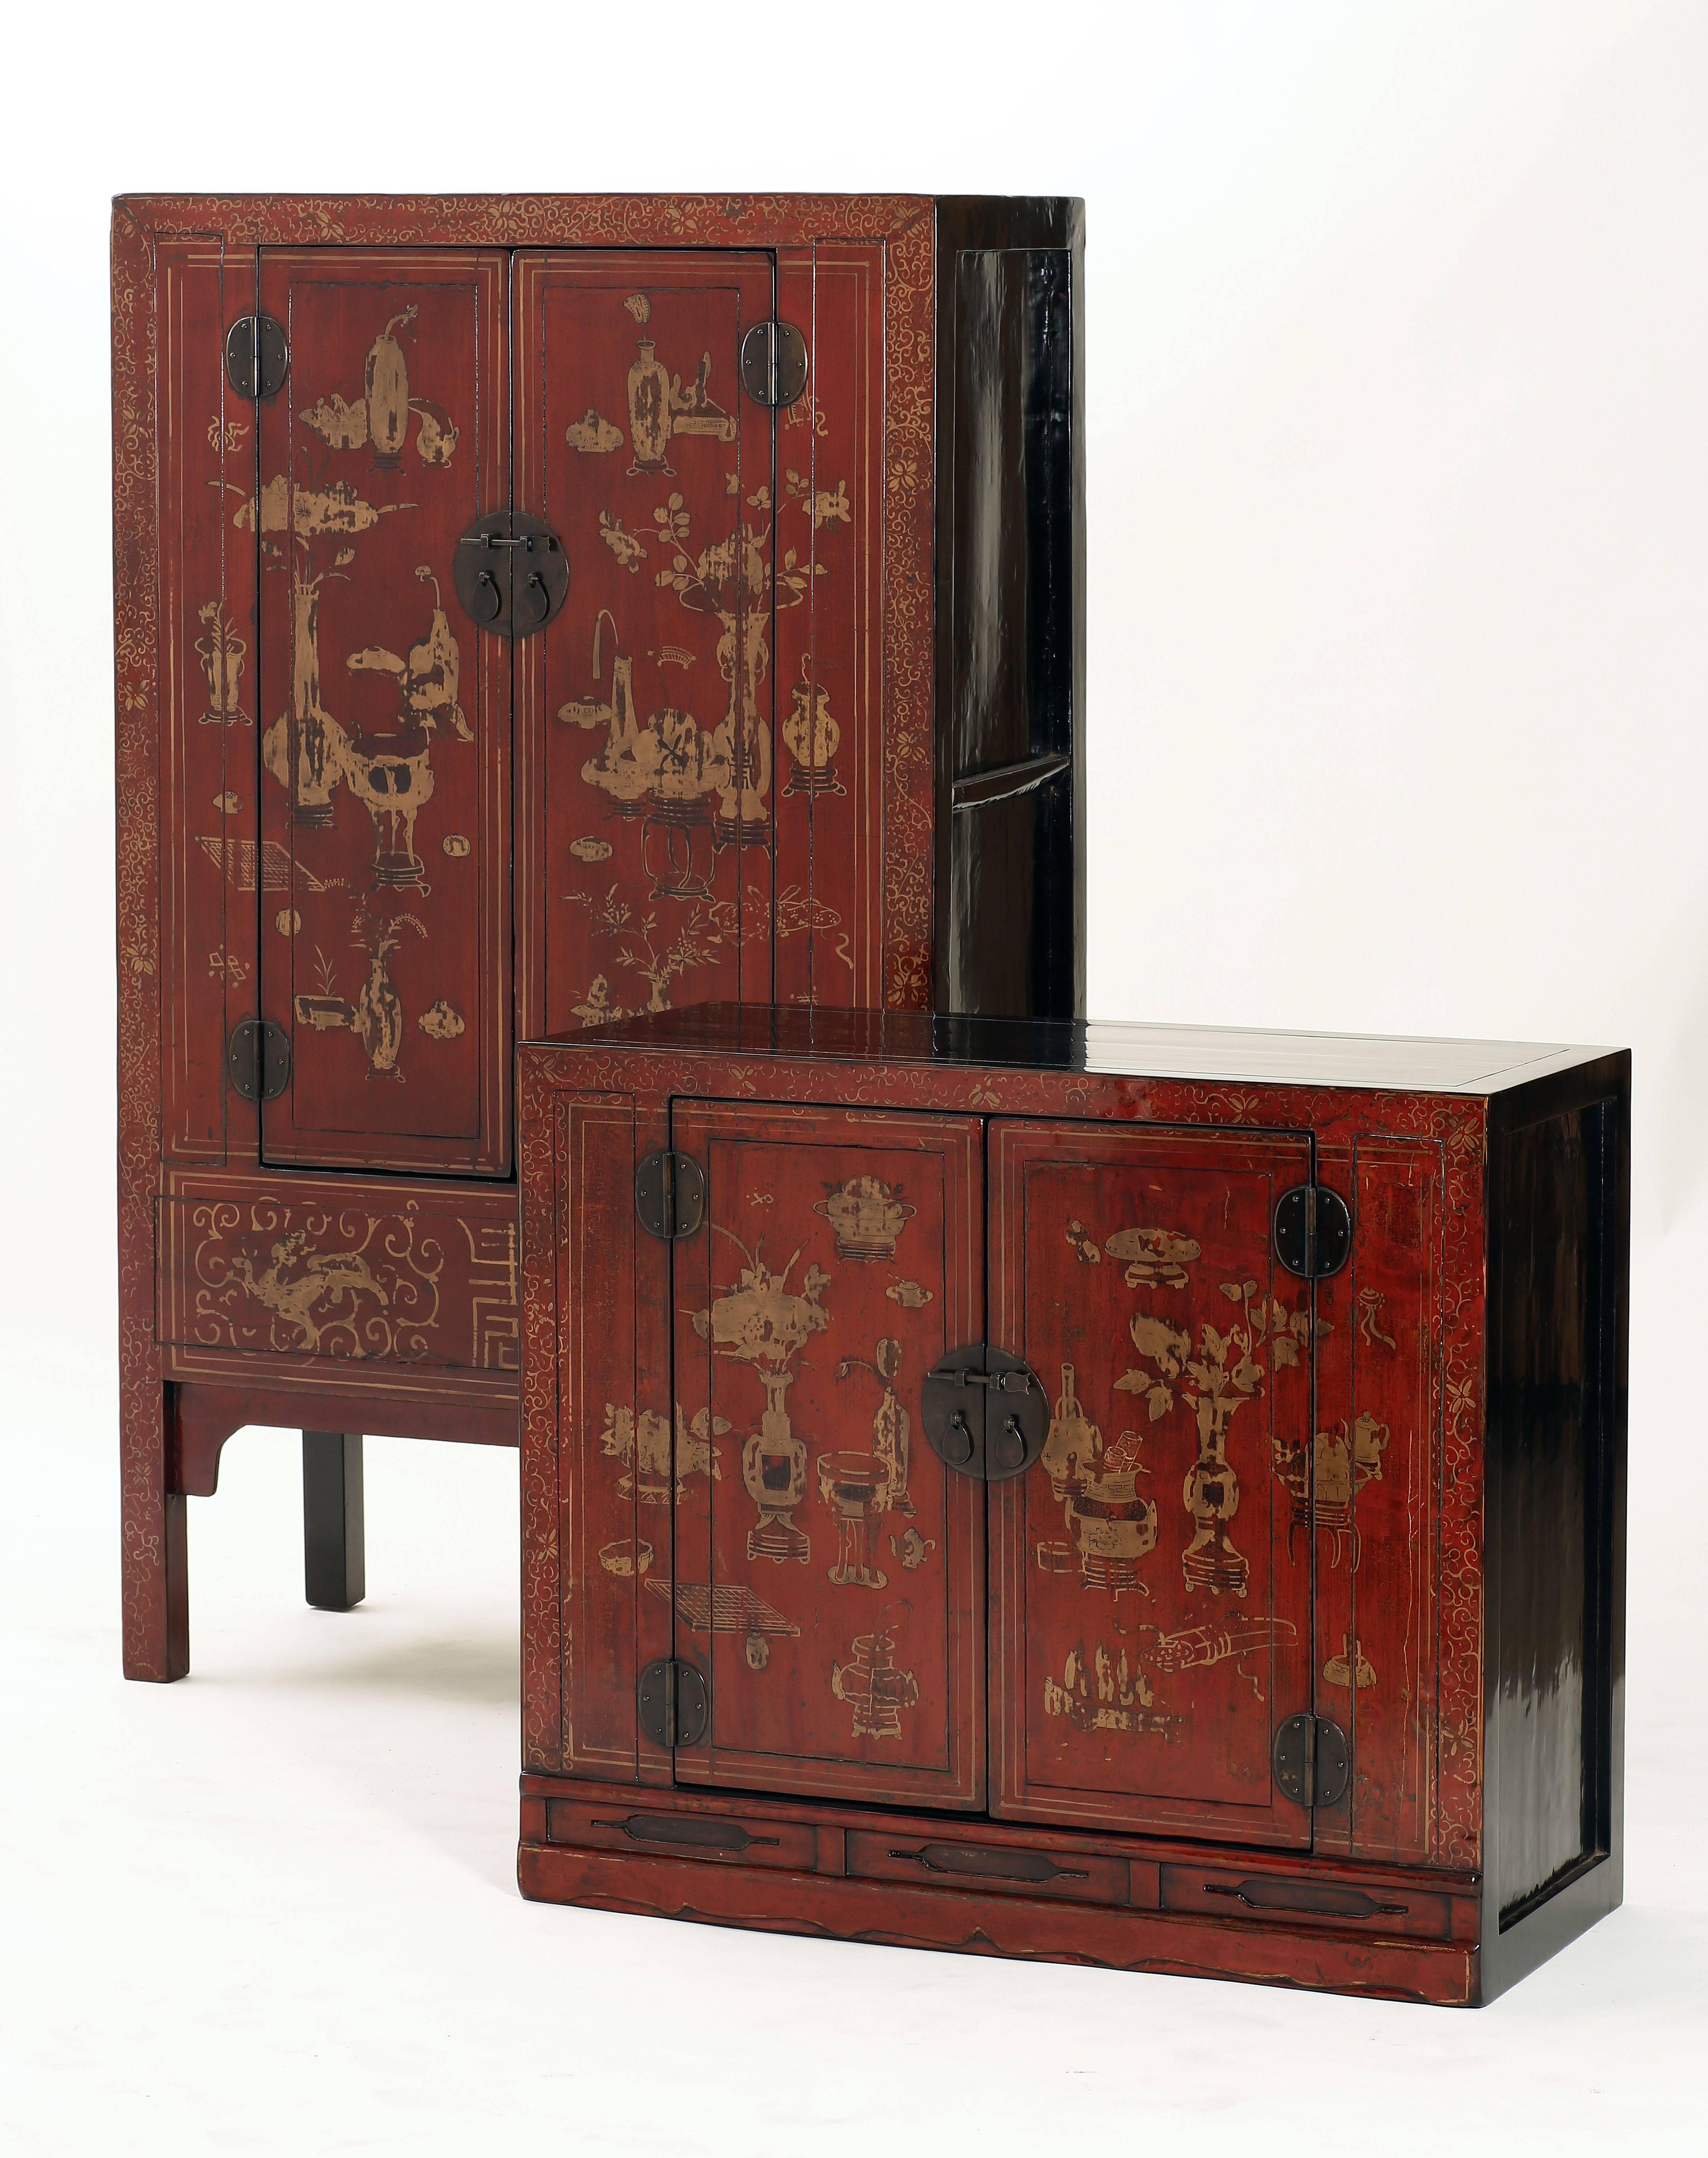 Of rectangular form, the cabinet consisting of two sections, the top section in the form of a book chest and the lower section square corner cabinet, each section with a pair of door panels hand painted with flowers in vases and scholastic treasures